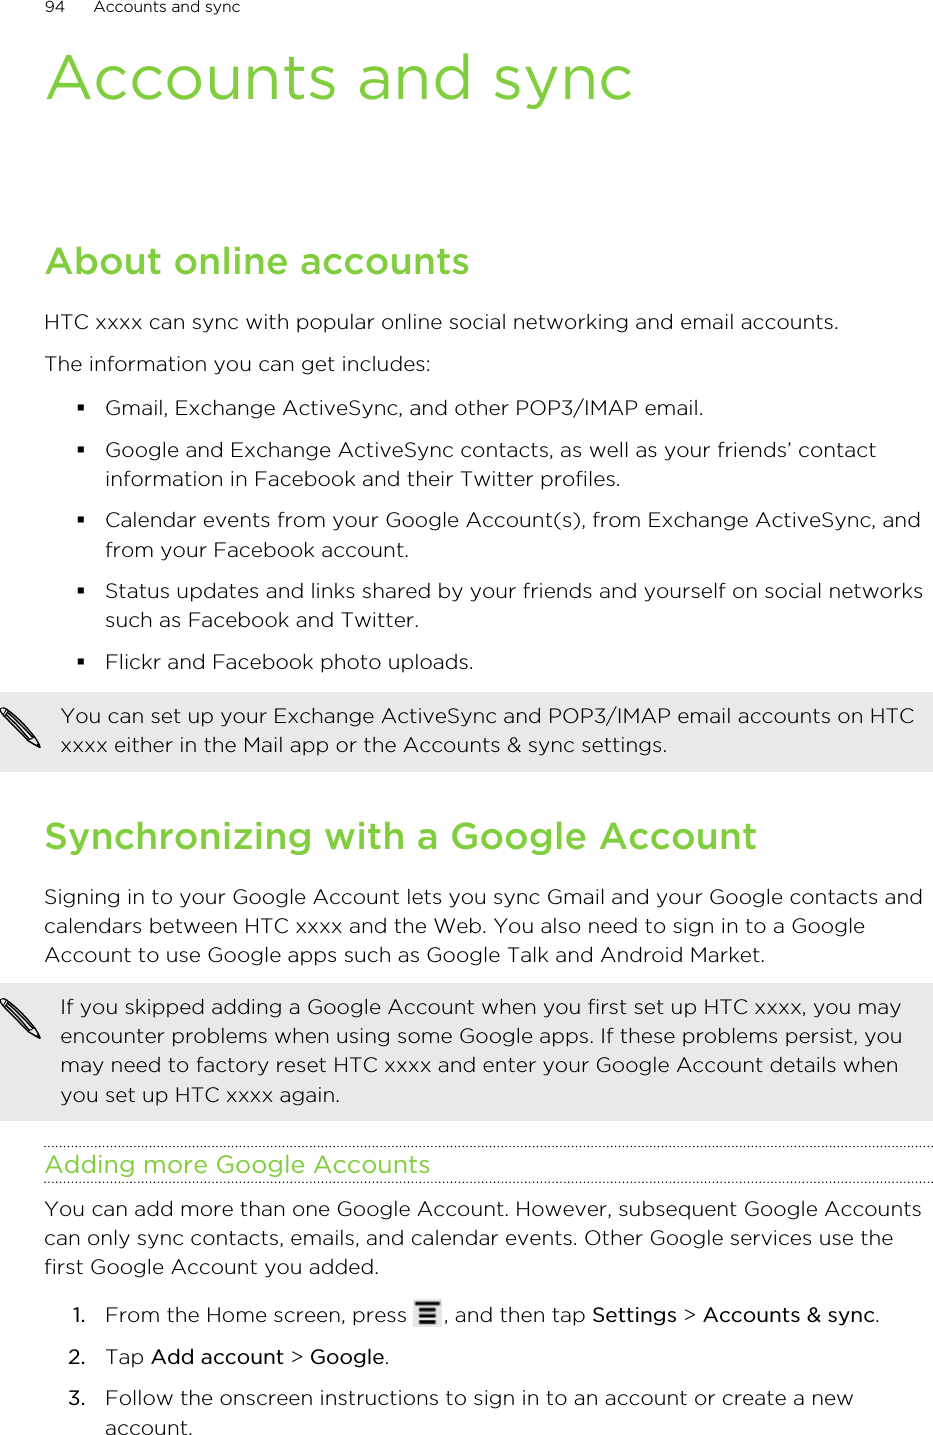 Accounts and syncAbout online accountsHTC xxxx can sync with popular online social networking and email accounts.The information you can get includes:§Gmail, Exchange ActiveSync, and other POP3/IMAP email.§Google and Exchange ActiveSync contacts, as well as your friends’ contactinformation in Facebook and their Twitter profiles.§Calendar events from your Google Account(s), from Exchange ActiveSync, andfrom your Facebook account.§Status updates and links shared by your friends and yourself on social networkssuch as Facebook and Twitter.§Flickr and Facebook photo uploads.You can set up your Exchange ActiveSync and POP3/IMAP email accounts on HTCxxxx either in the Mail app or the Accounts &amp; sync settings.Synchronizing with a Google AccountSigning in to your Google Account lets you sync Gmail and your Google contacts andcalendars between HTC xxxx and the Web. You also need to sign in to a GoogleAccount to use Google apps such as Google Talk and Android Market.If you skipped adding a Google Account when you first set up HTC xxxx, you mayencounter problems when using some Google apps. If these problems persist, youmay need to factory reset HTC xxxx and enter your Google Account details whenyou set up HTC xxxx again.Adding more Google AccountsYou can add more than one Google Account. However, subsequent Google Accountscan only sync contacts, emails, and calendar events. Other Google services use thefirst Google Account you added.1. From the Home screen, press  , and then tap Settings &gt; Accounts &amp; sync.2. Tap Add account &gt; Google.3. Follow the onscreen instructions to sign in to an account or create a newaccount.94 Accounts and sync